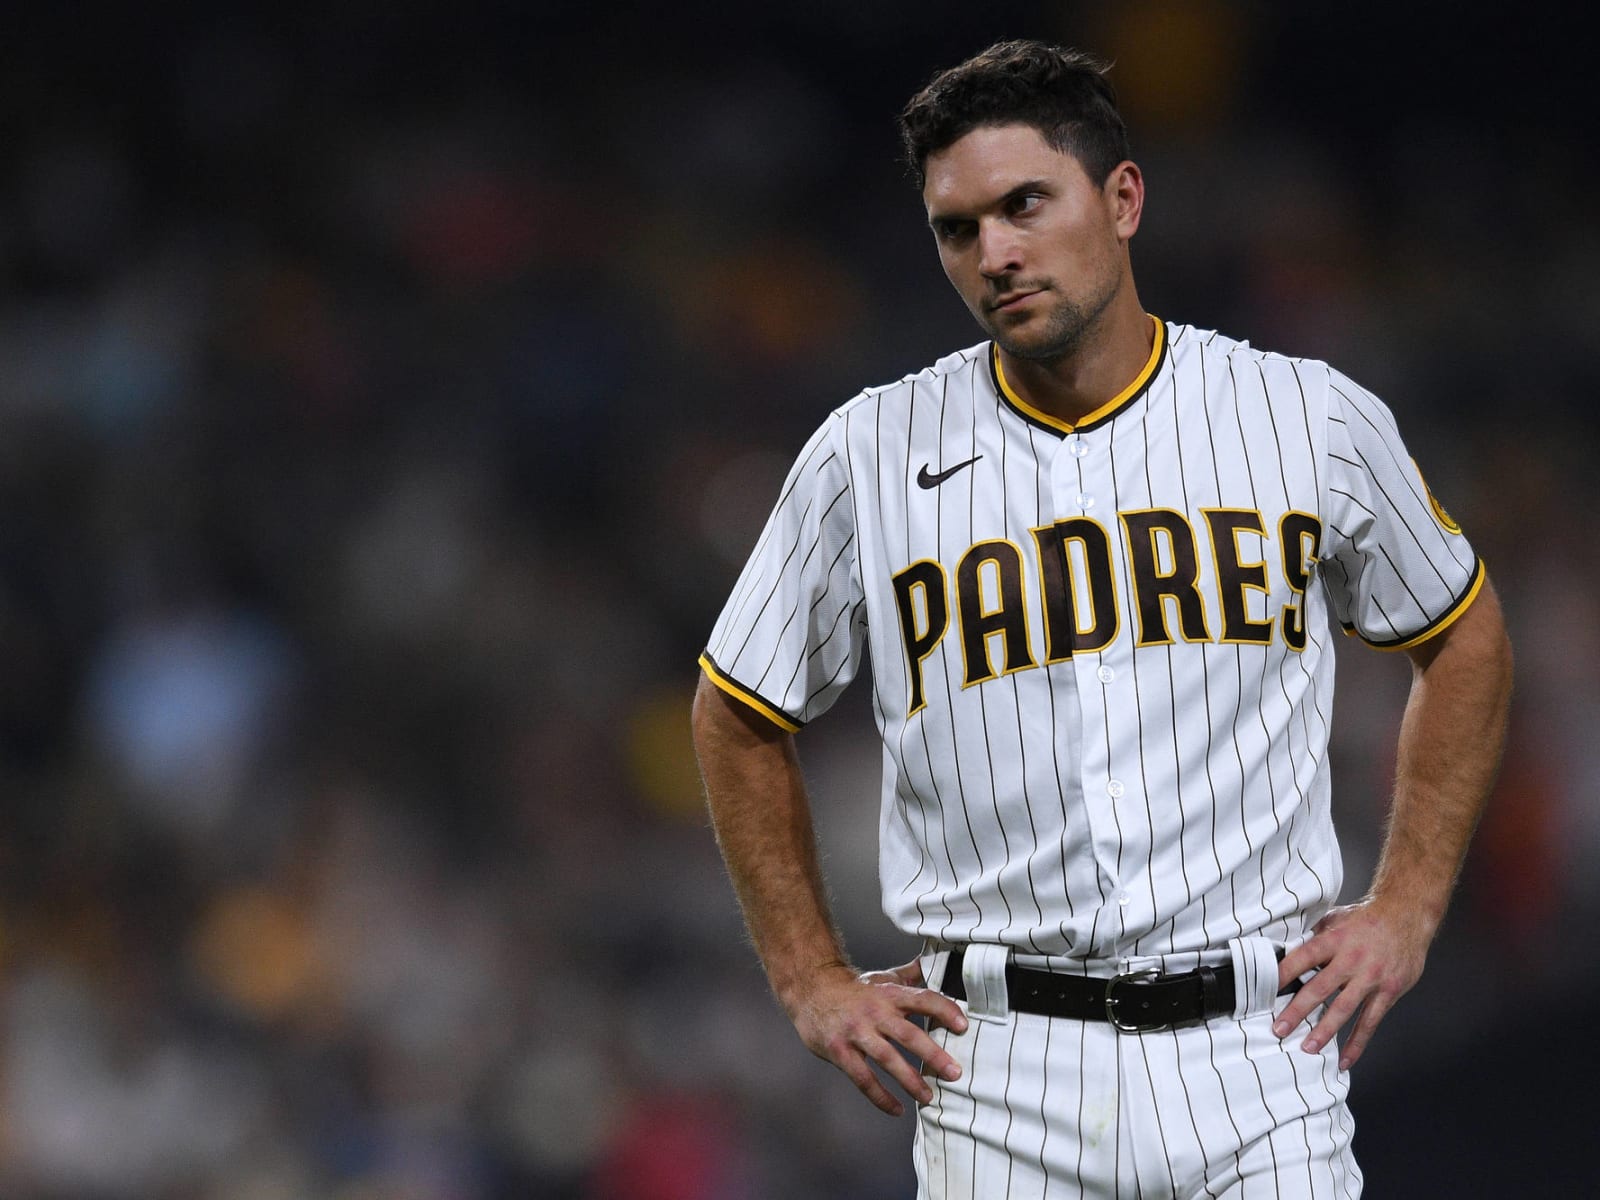 Meet Adam Frazier, the All-Star infielder acquired for the Padres